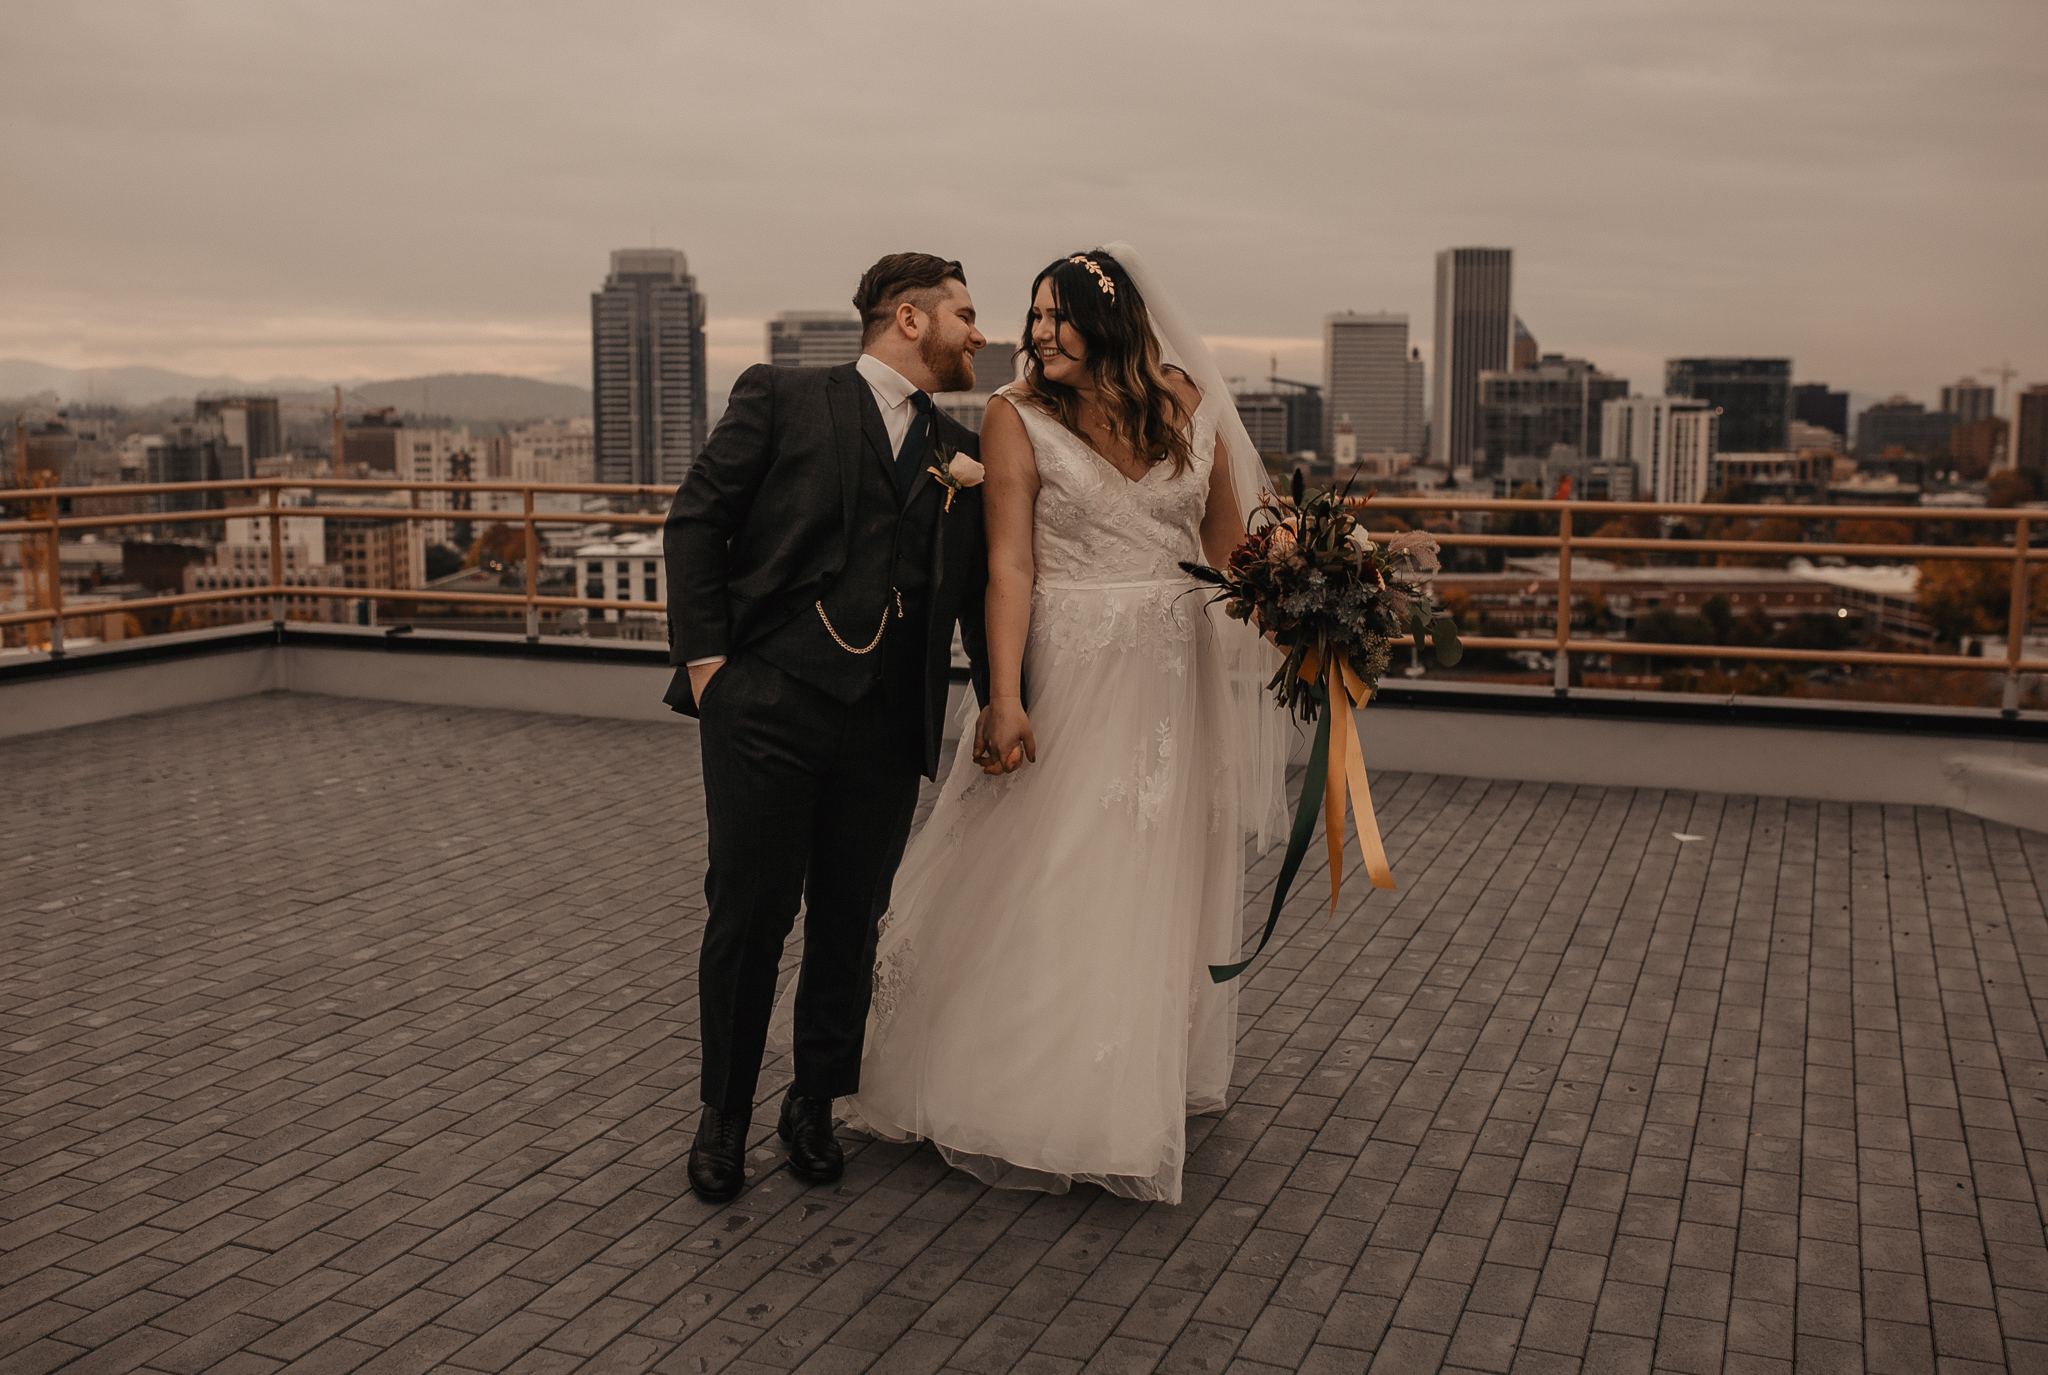  downtown portland rooftop first look on wedding day 